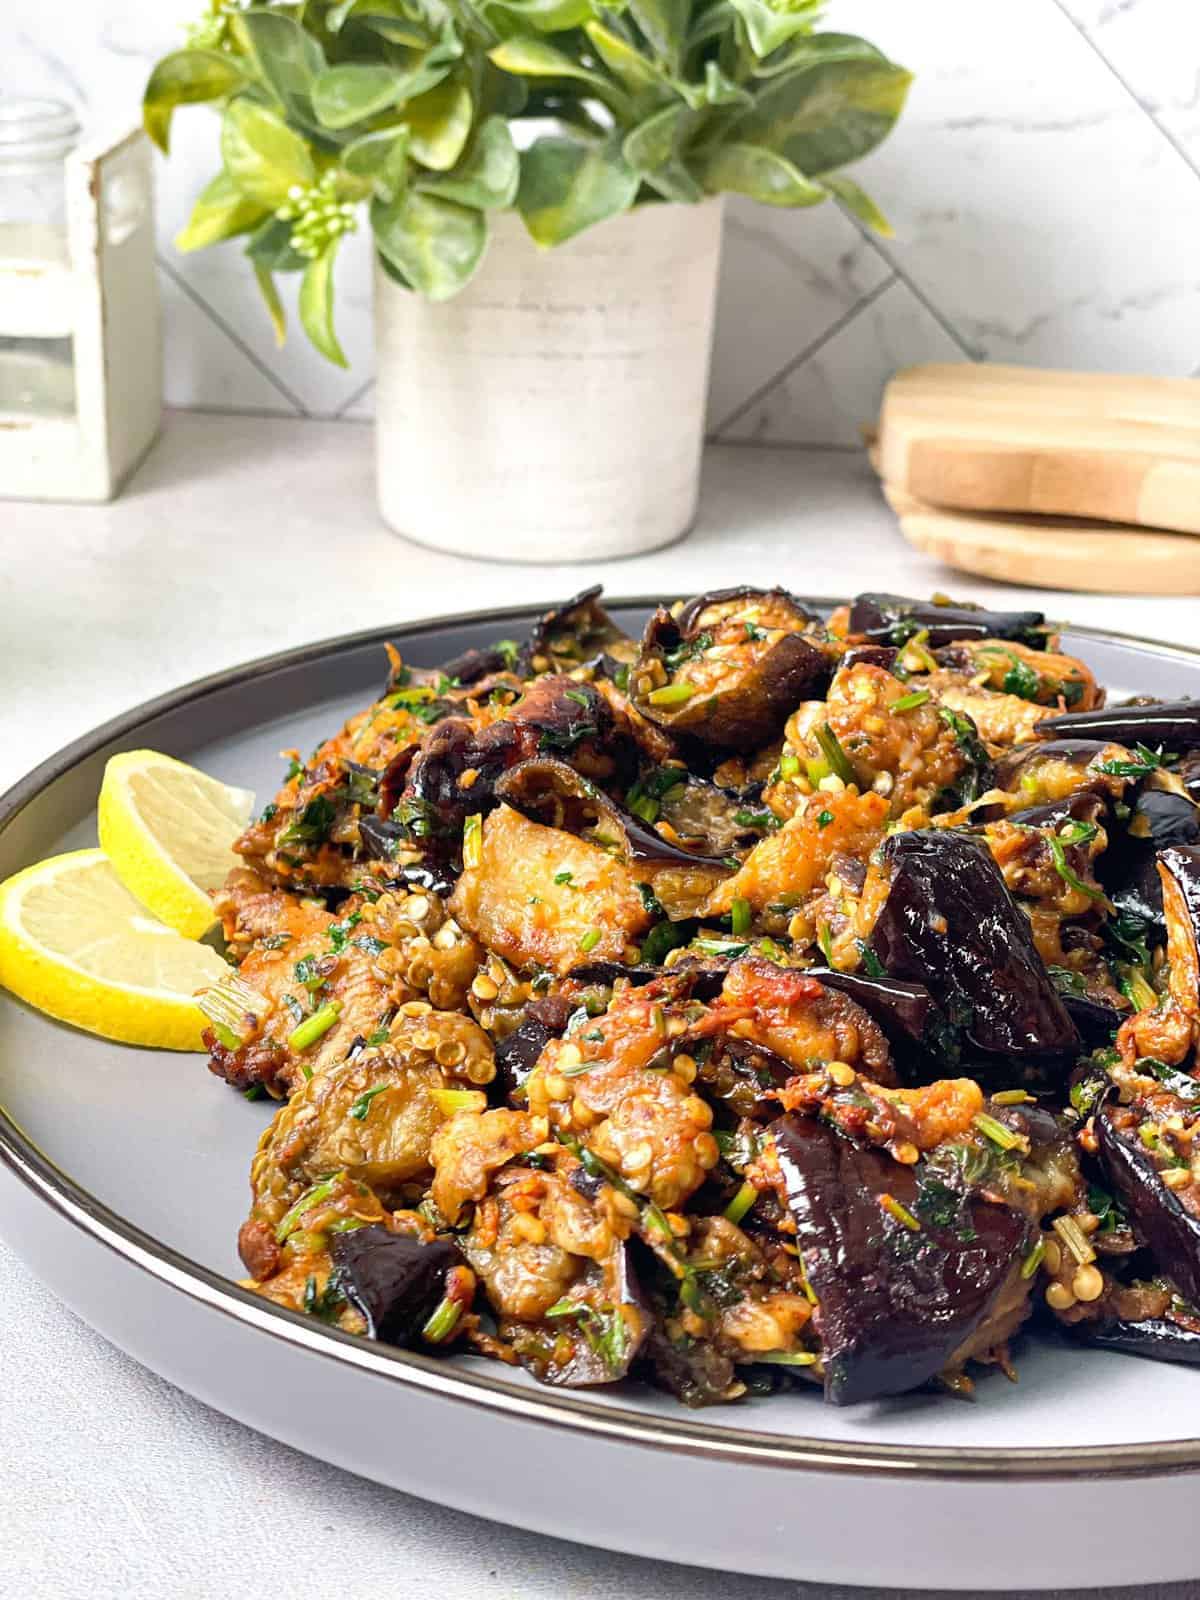 A mouthwatering plate of of spicy eggplants cilantro for vegans